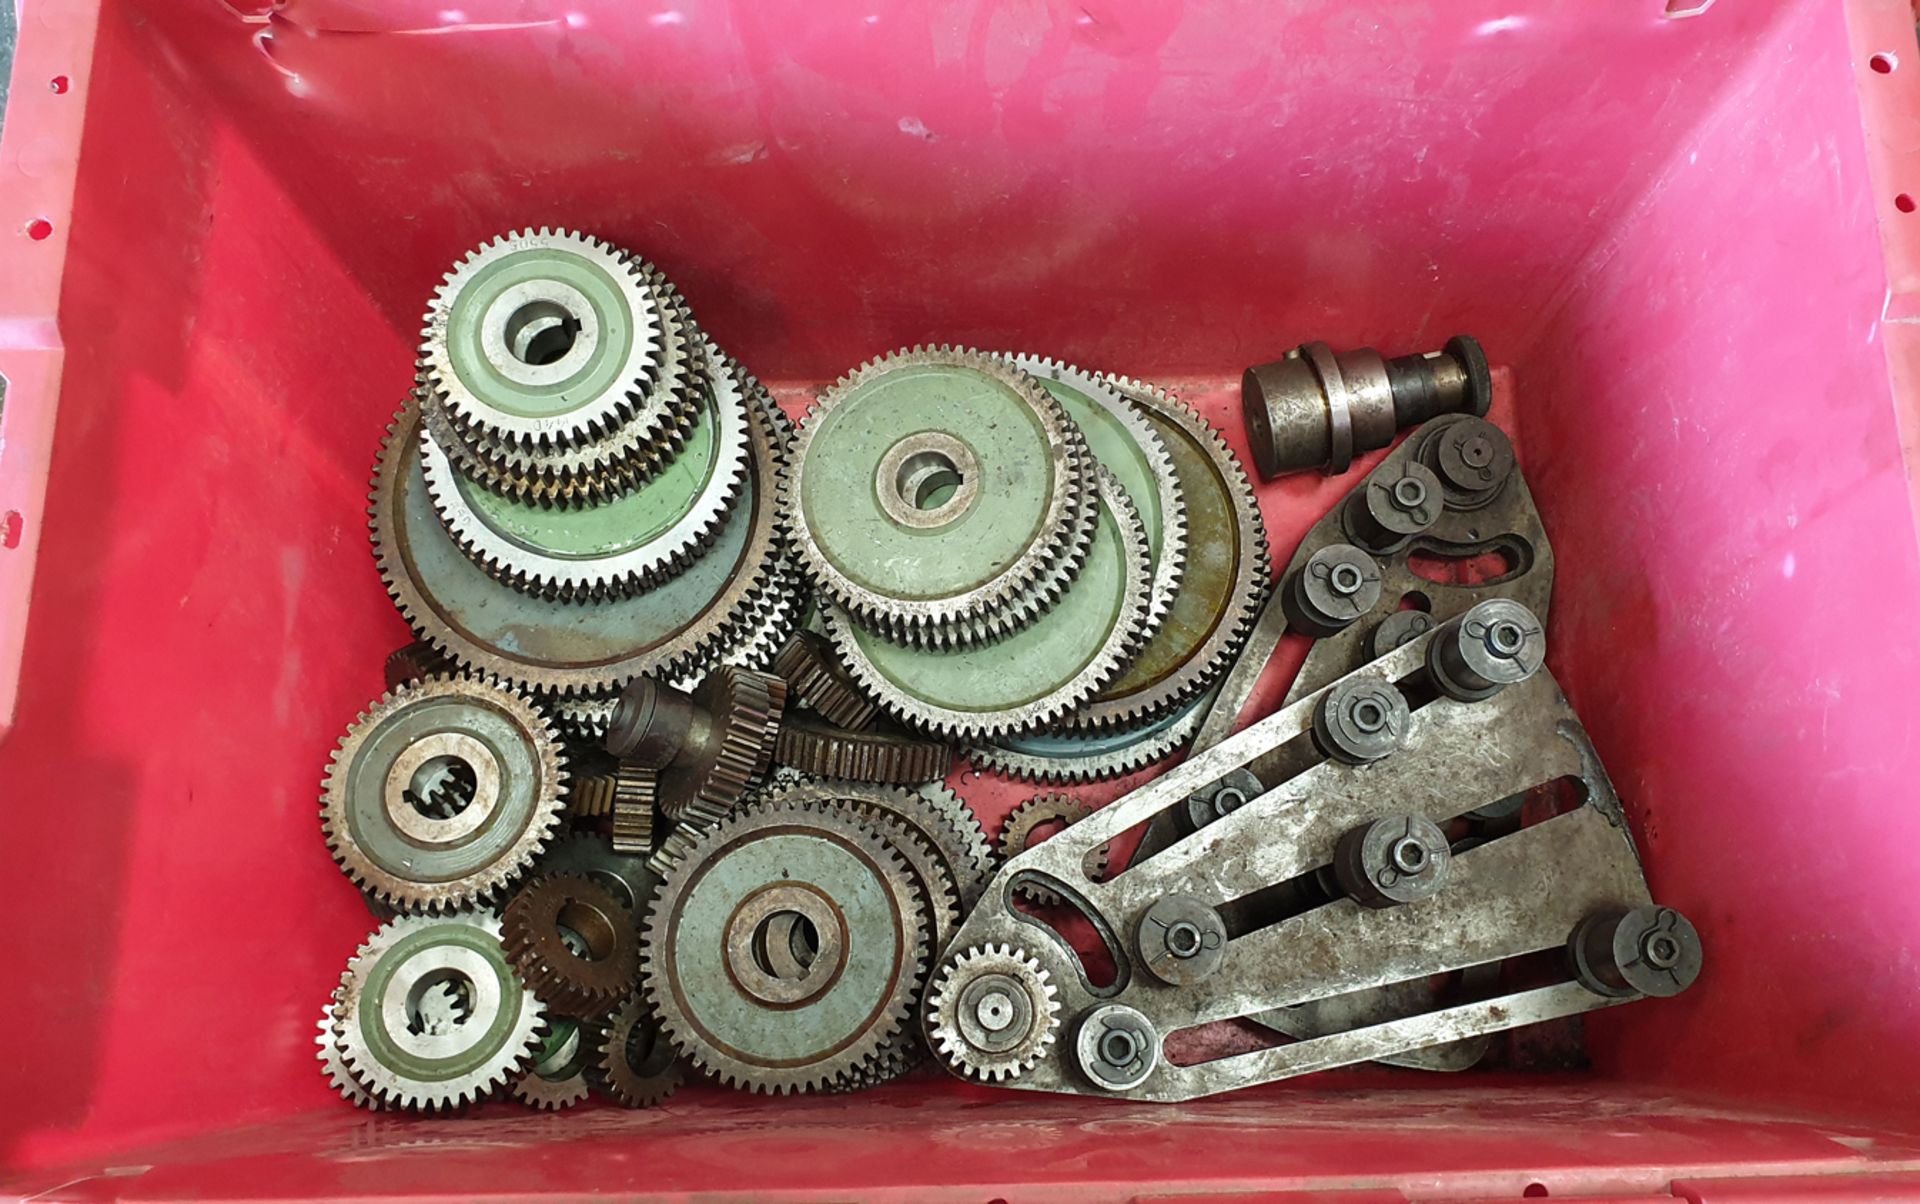 Gear Train and Gears for Milling Machine Table. Gear Bores 30mm. Gear Thickness 18mm.